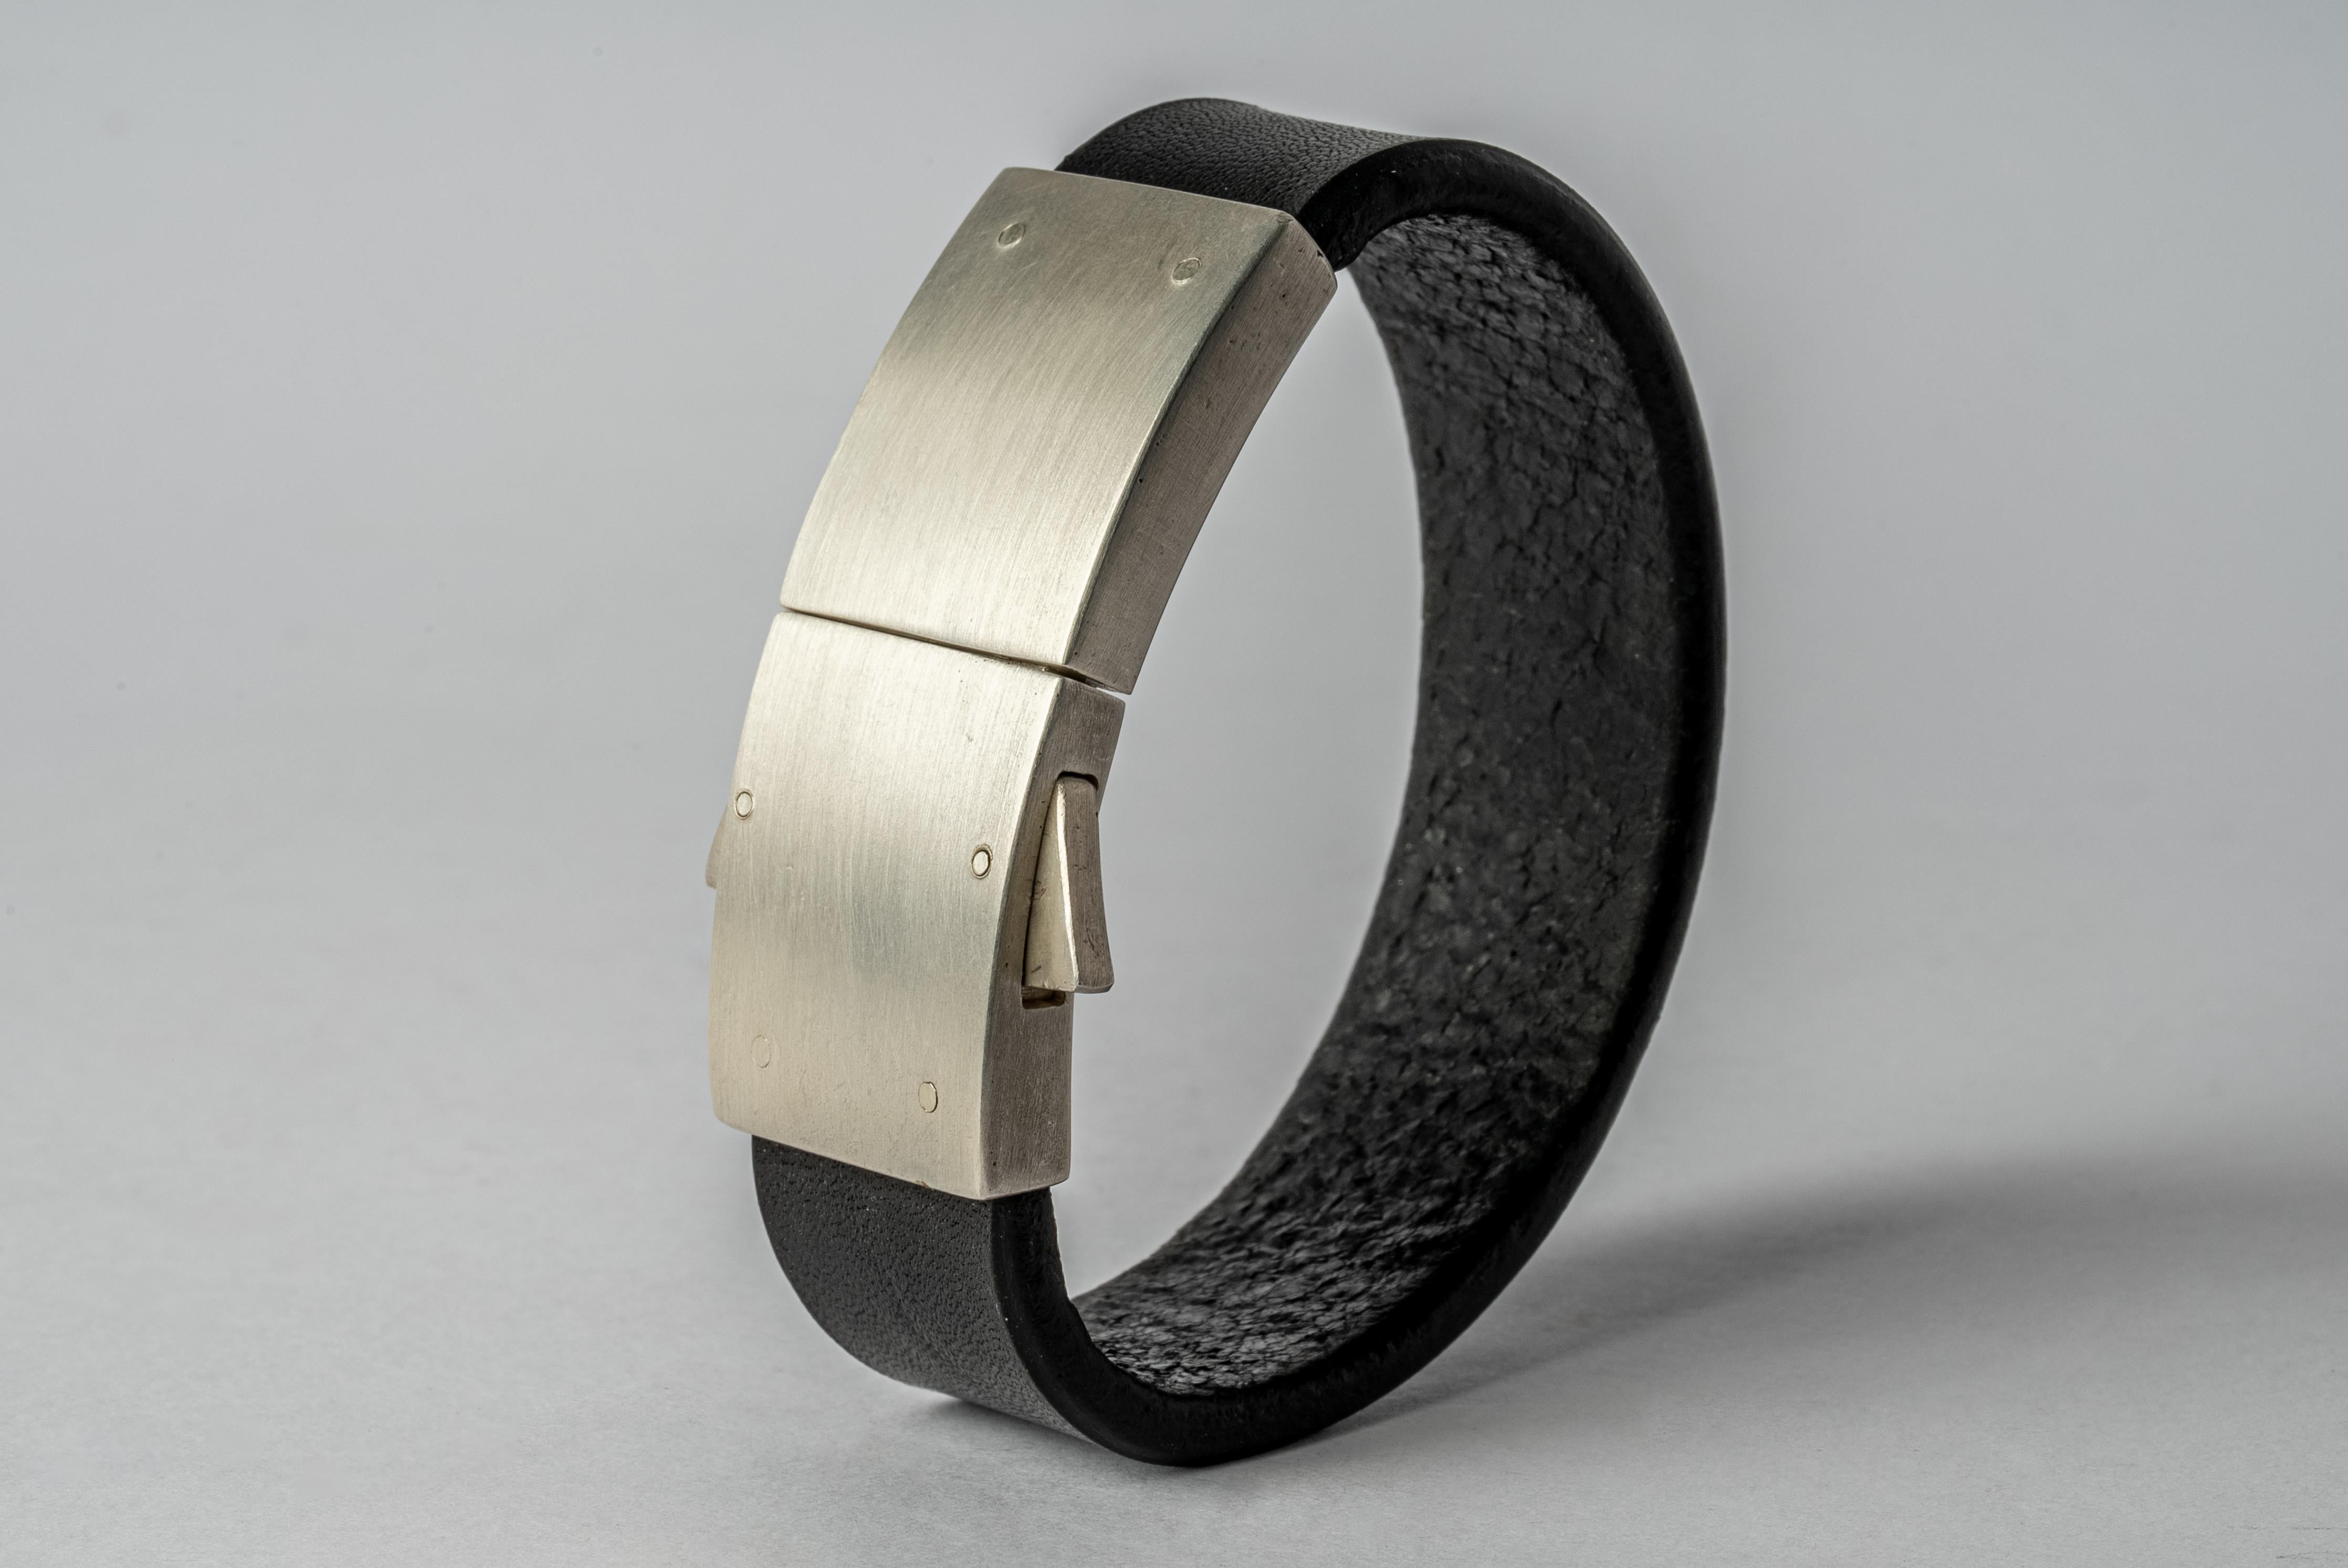 Bracelet in black buffalo leather and acid treated silver plated brass.
Dimensions
Bracelet width: 25 mm
Weight: 50 grams